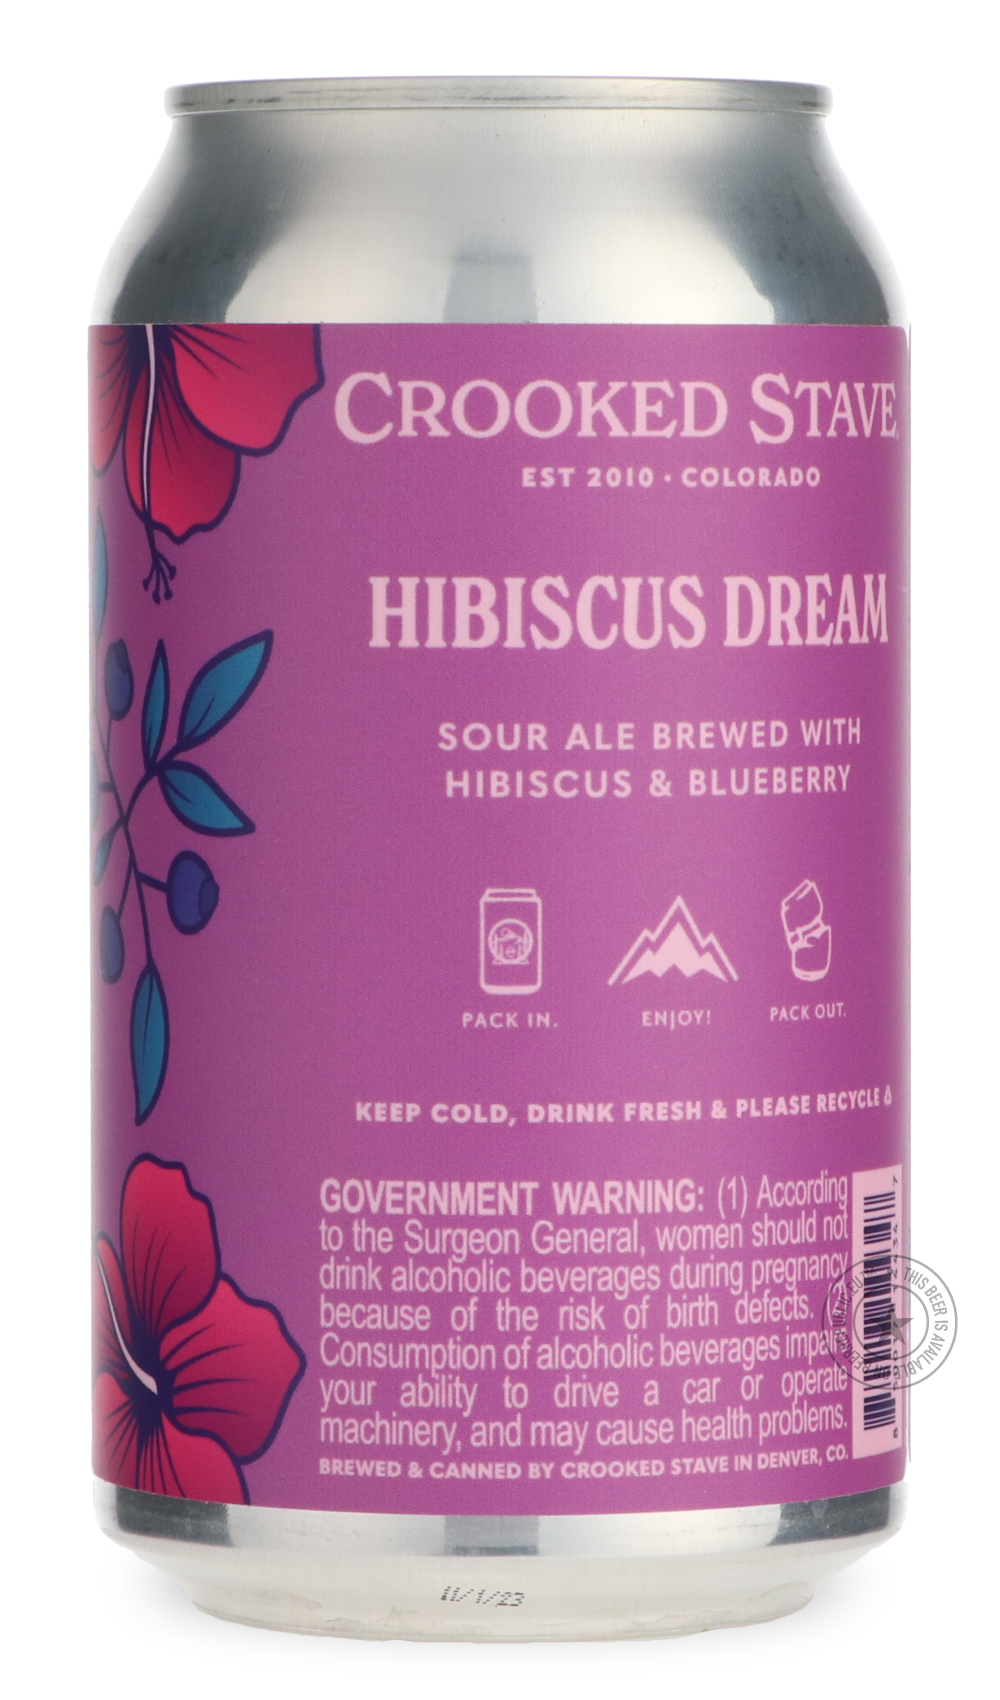 -Crooked Stave- Hibiscus Dream-Sour / Wild & Fruity- Only @ Beer Republic - The best online beer store for American & Canadian craft beer - Buy beer online from the USA and Canada - Bier online kopen - Amerikaans bier kopen - Craft beer store - Craft beer kopen - Amerikanisch bier kaufen - Bier online kaufen - Acheter biere online - IPA - Stout - Porter - New England IPA - Hazy IPA - Imperial Stout - Barrel Aged - Barrel Aged Imperial Stout - Brown - Dark beer - Blond - Blonde - Pilsner - Lager - Wheat - We